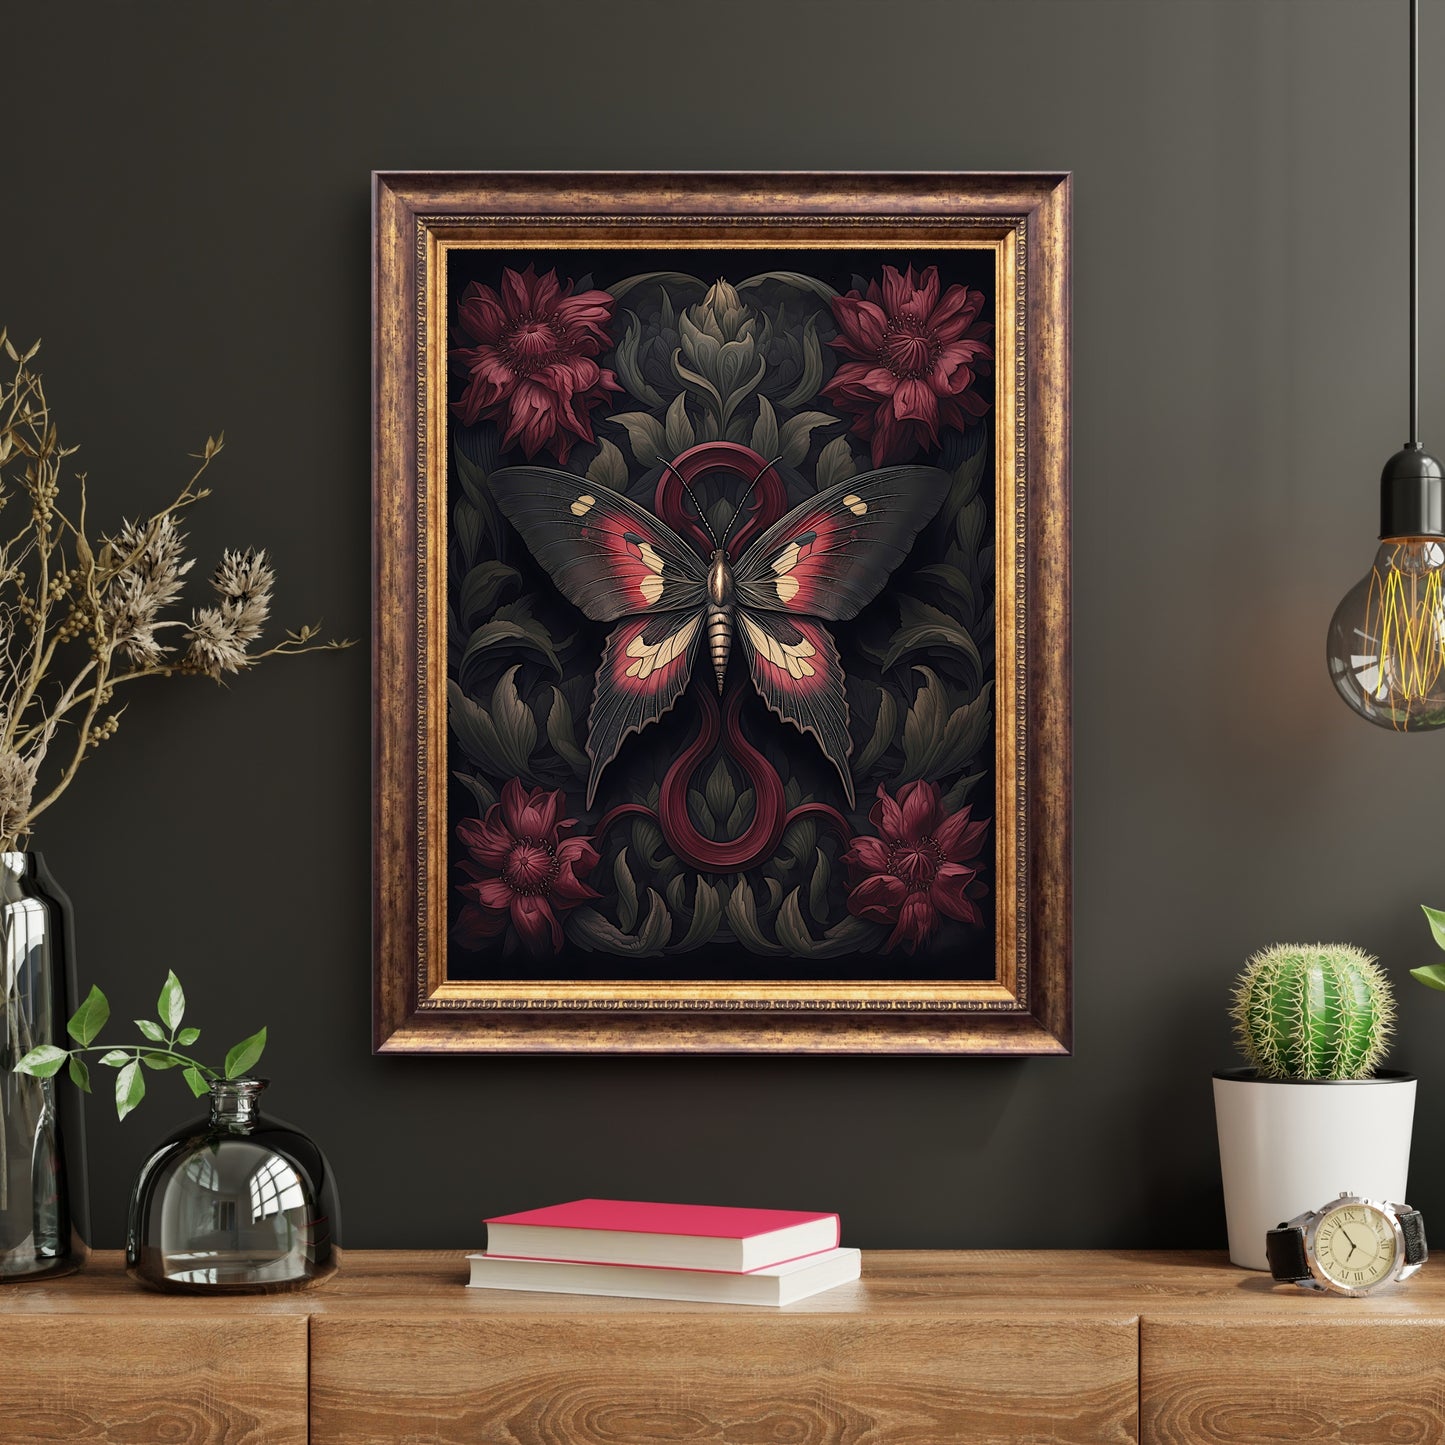 Botanical Moth Paper Poster Prints Dark Cottagecore Wall Art Witchy Gothic Botanical Decor Dark Academia Goblincore Goth Home Decor Moody Painting